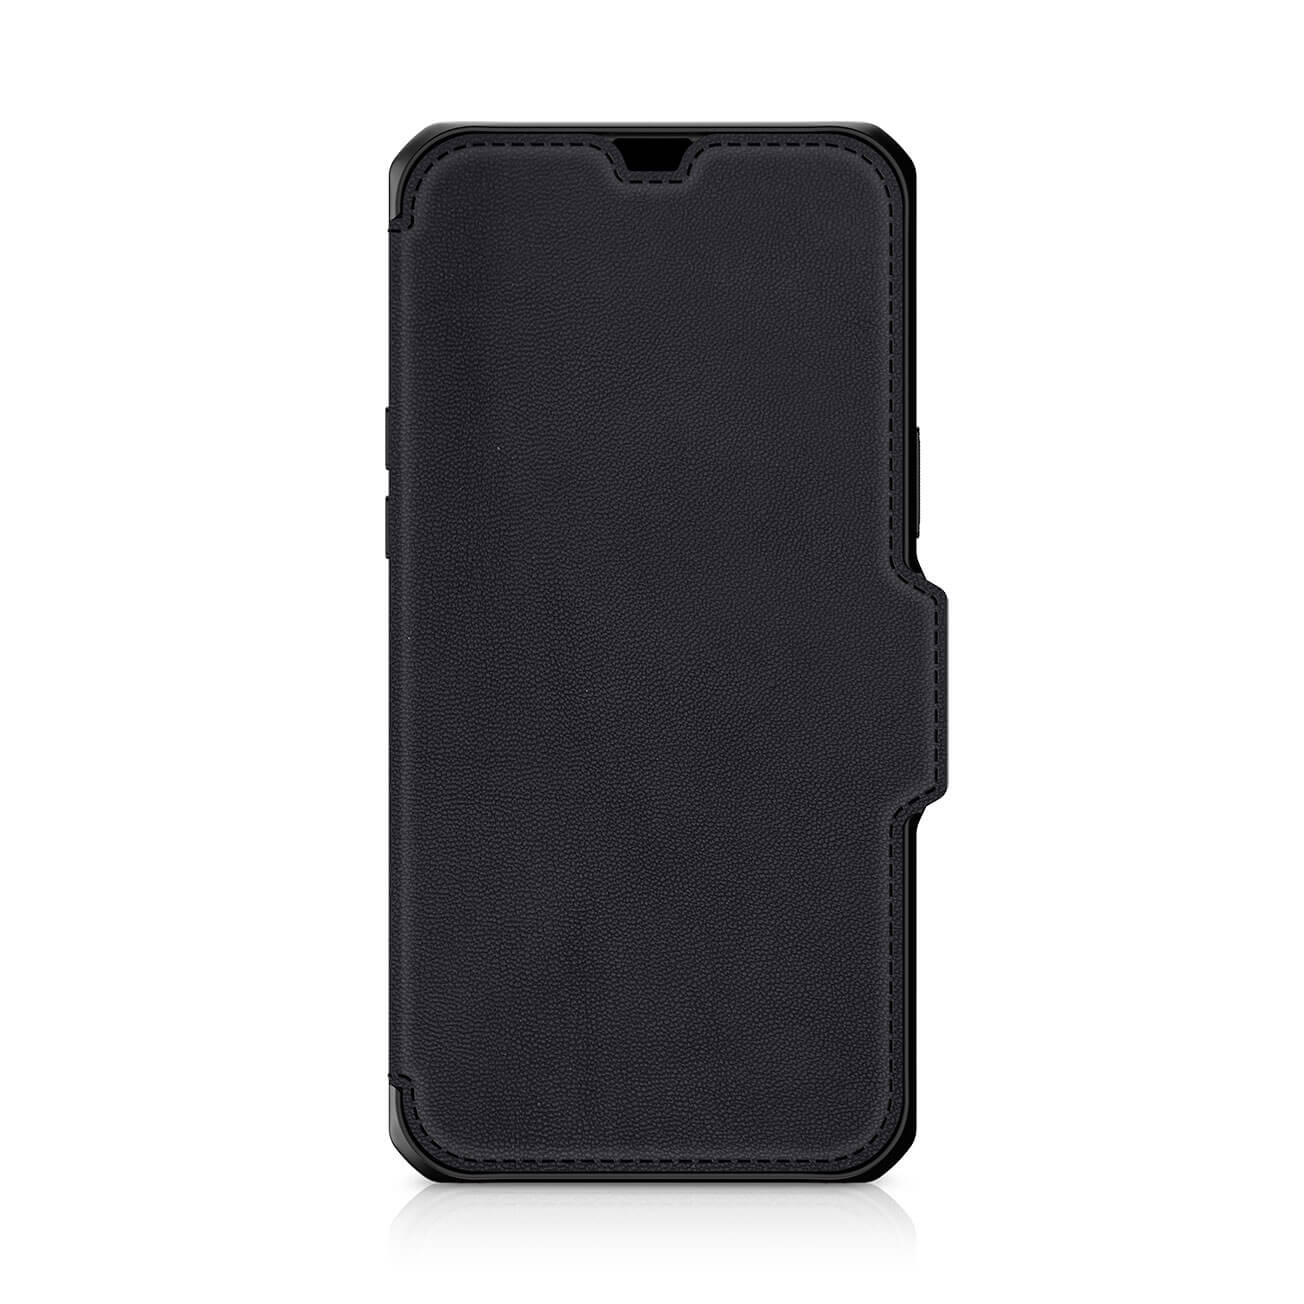 ITSKINS - Hybrid Folio Leather for iPhone 13 Pro Max/12 Pro Max [ Black with real leather ]